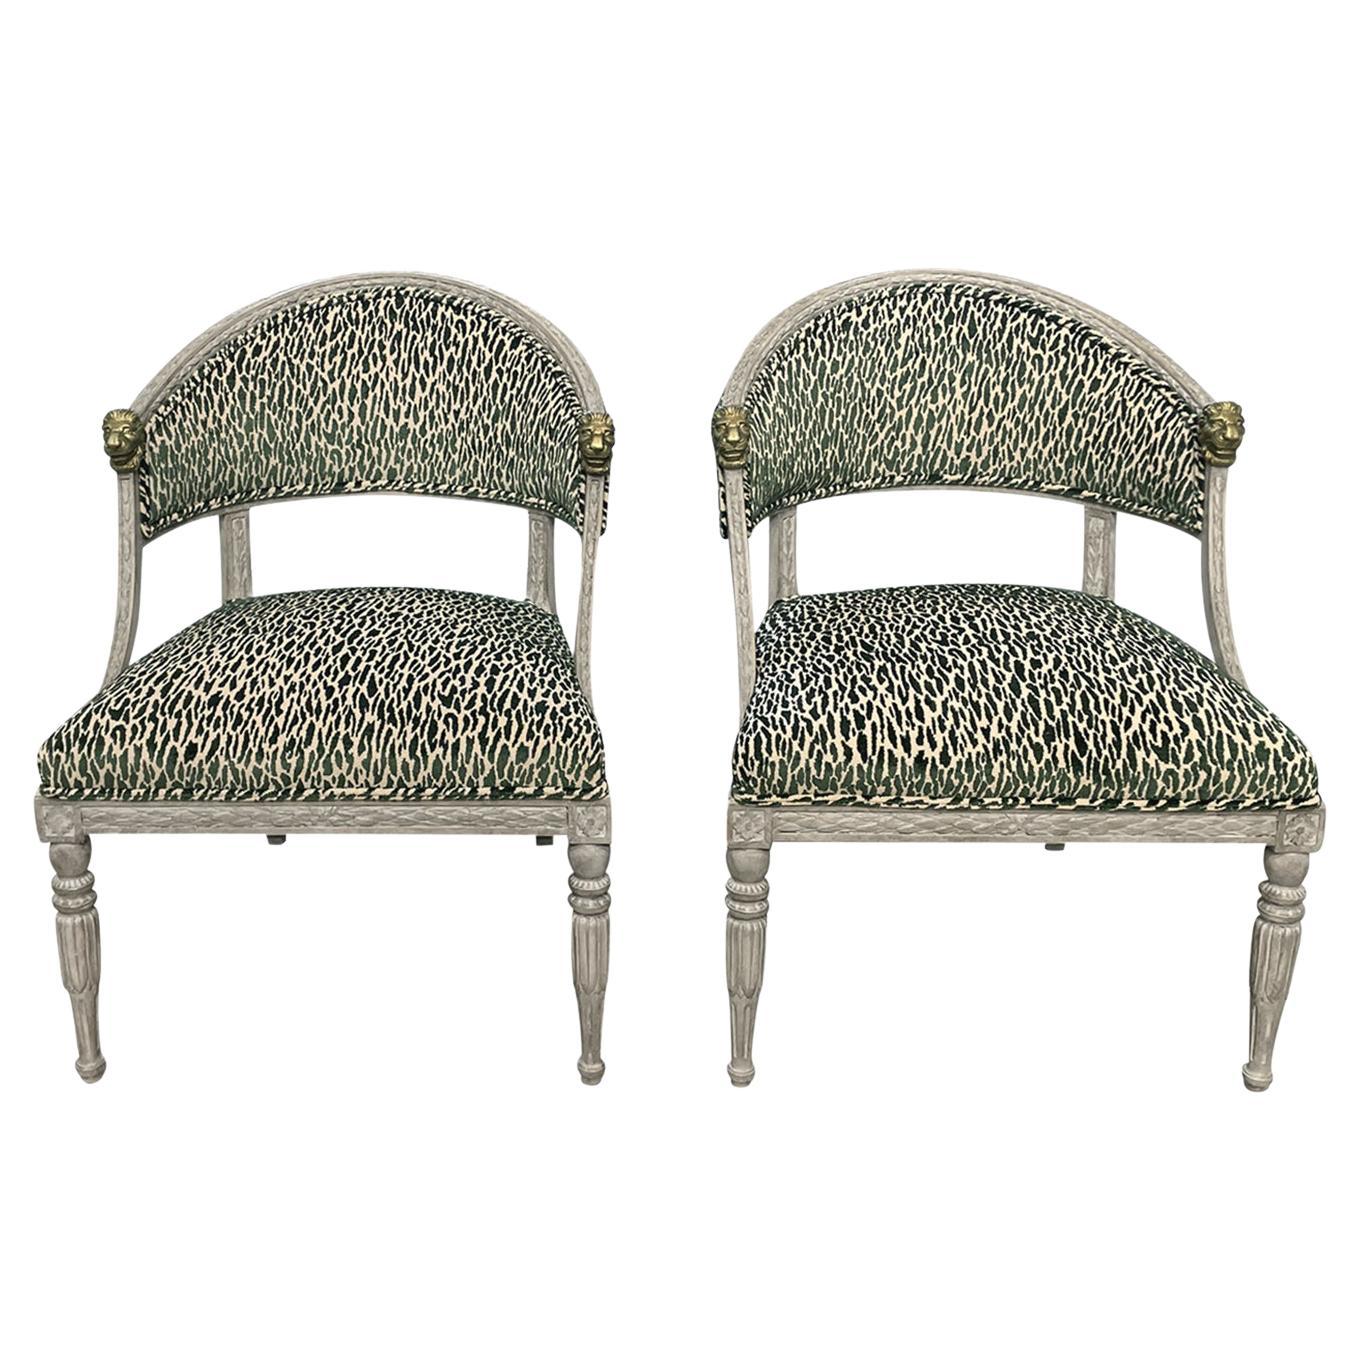 Pair of 19th Century Swedish Gustavian Side Chairs Attributed to Ephraim Ståhl For Sale